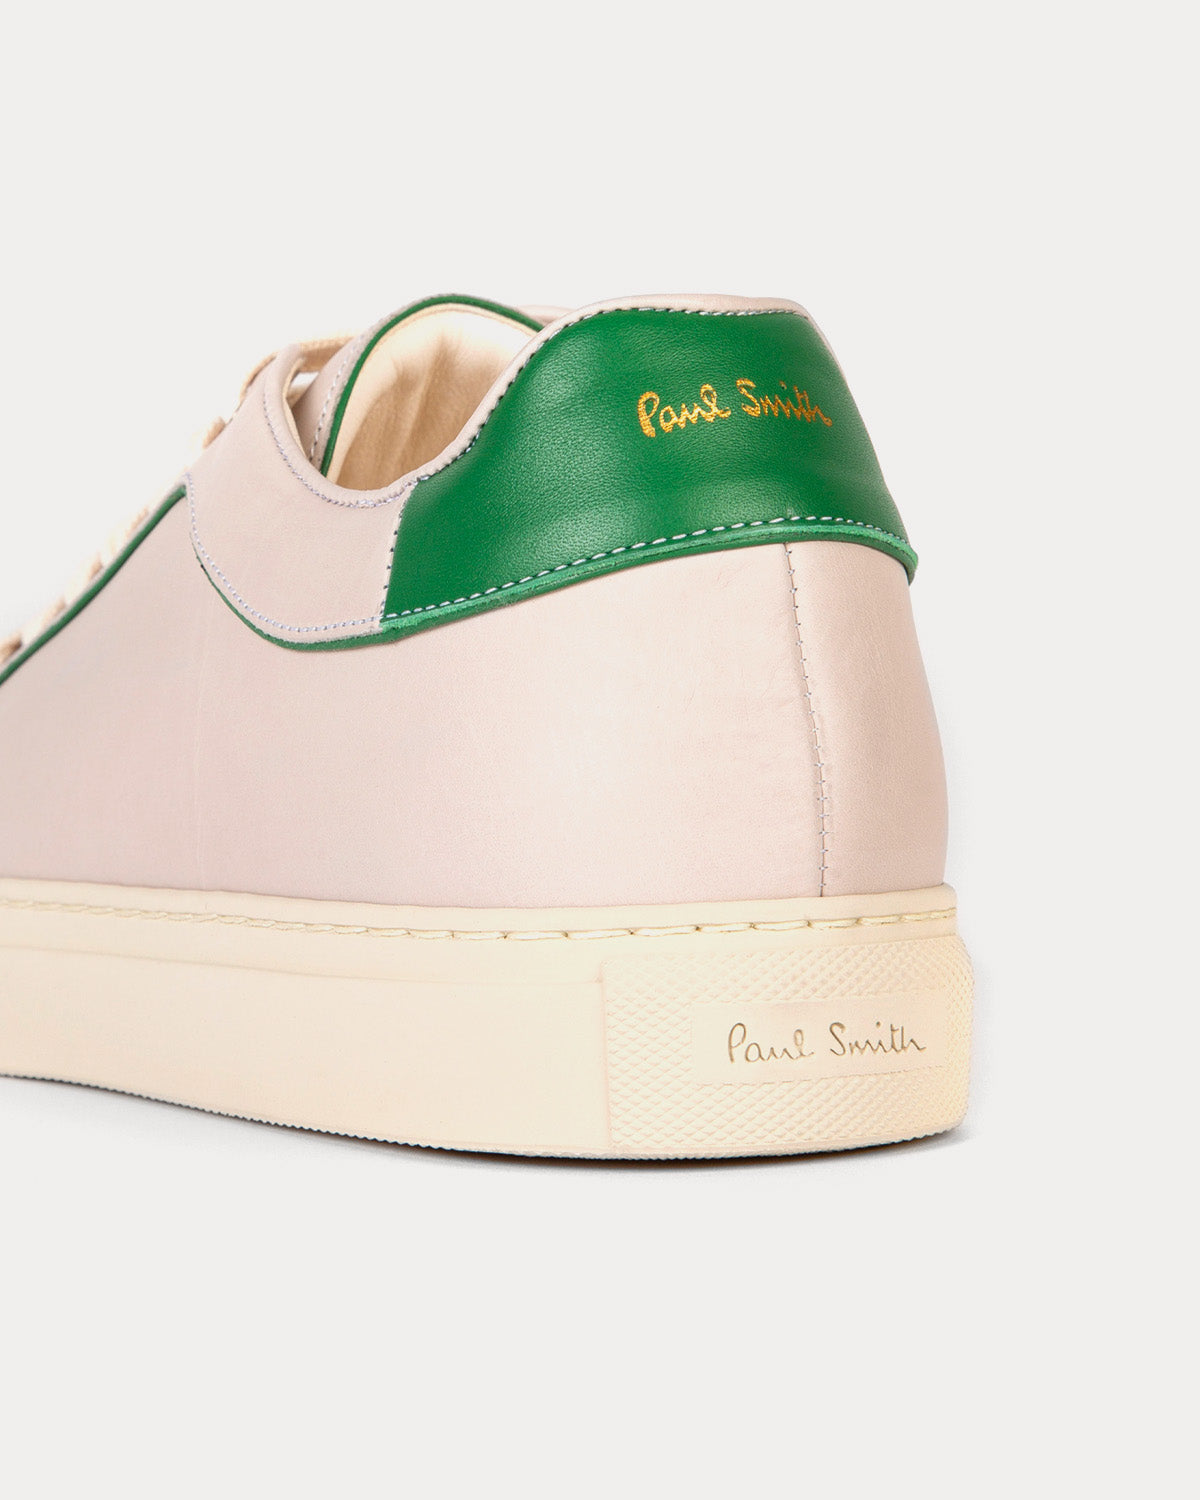 Paul Smith - Basso with Green Trim Cream Low Top Sneakers